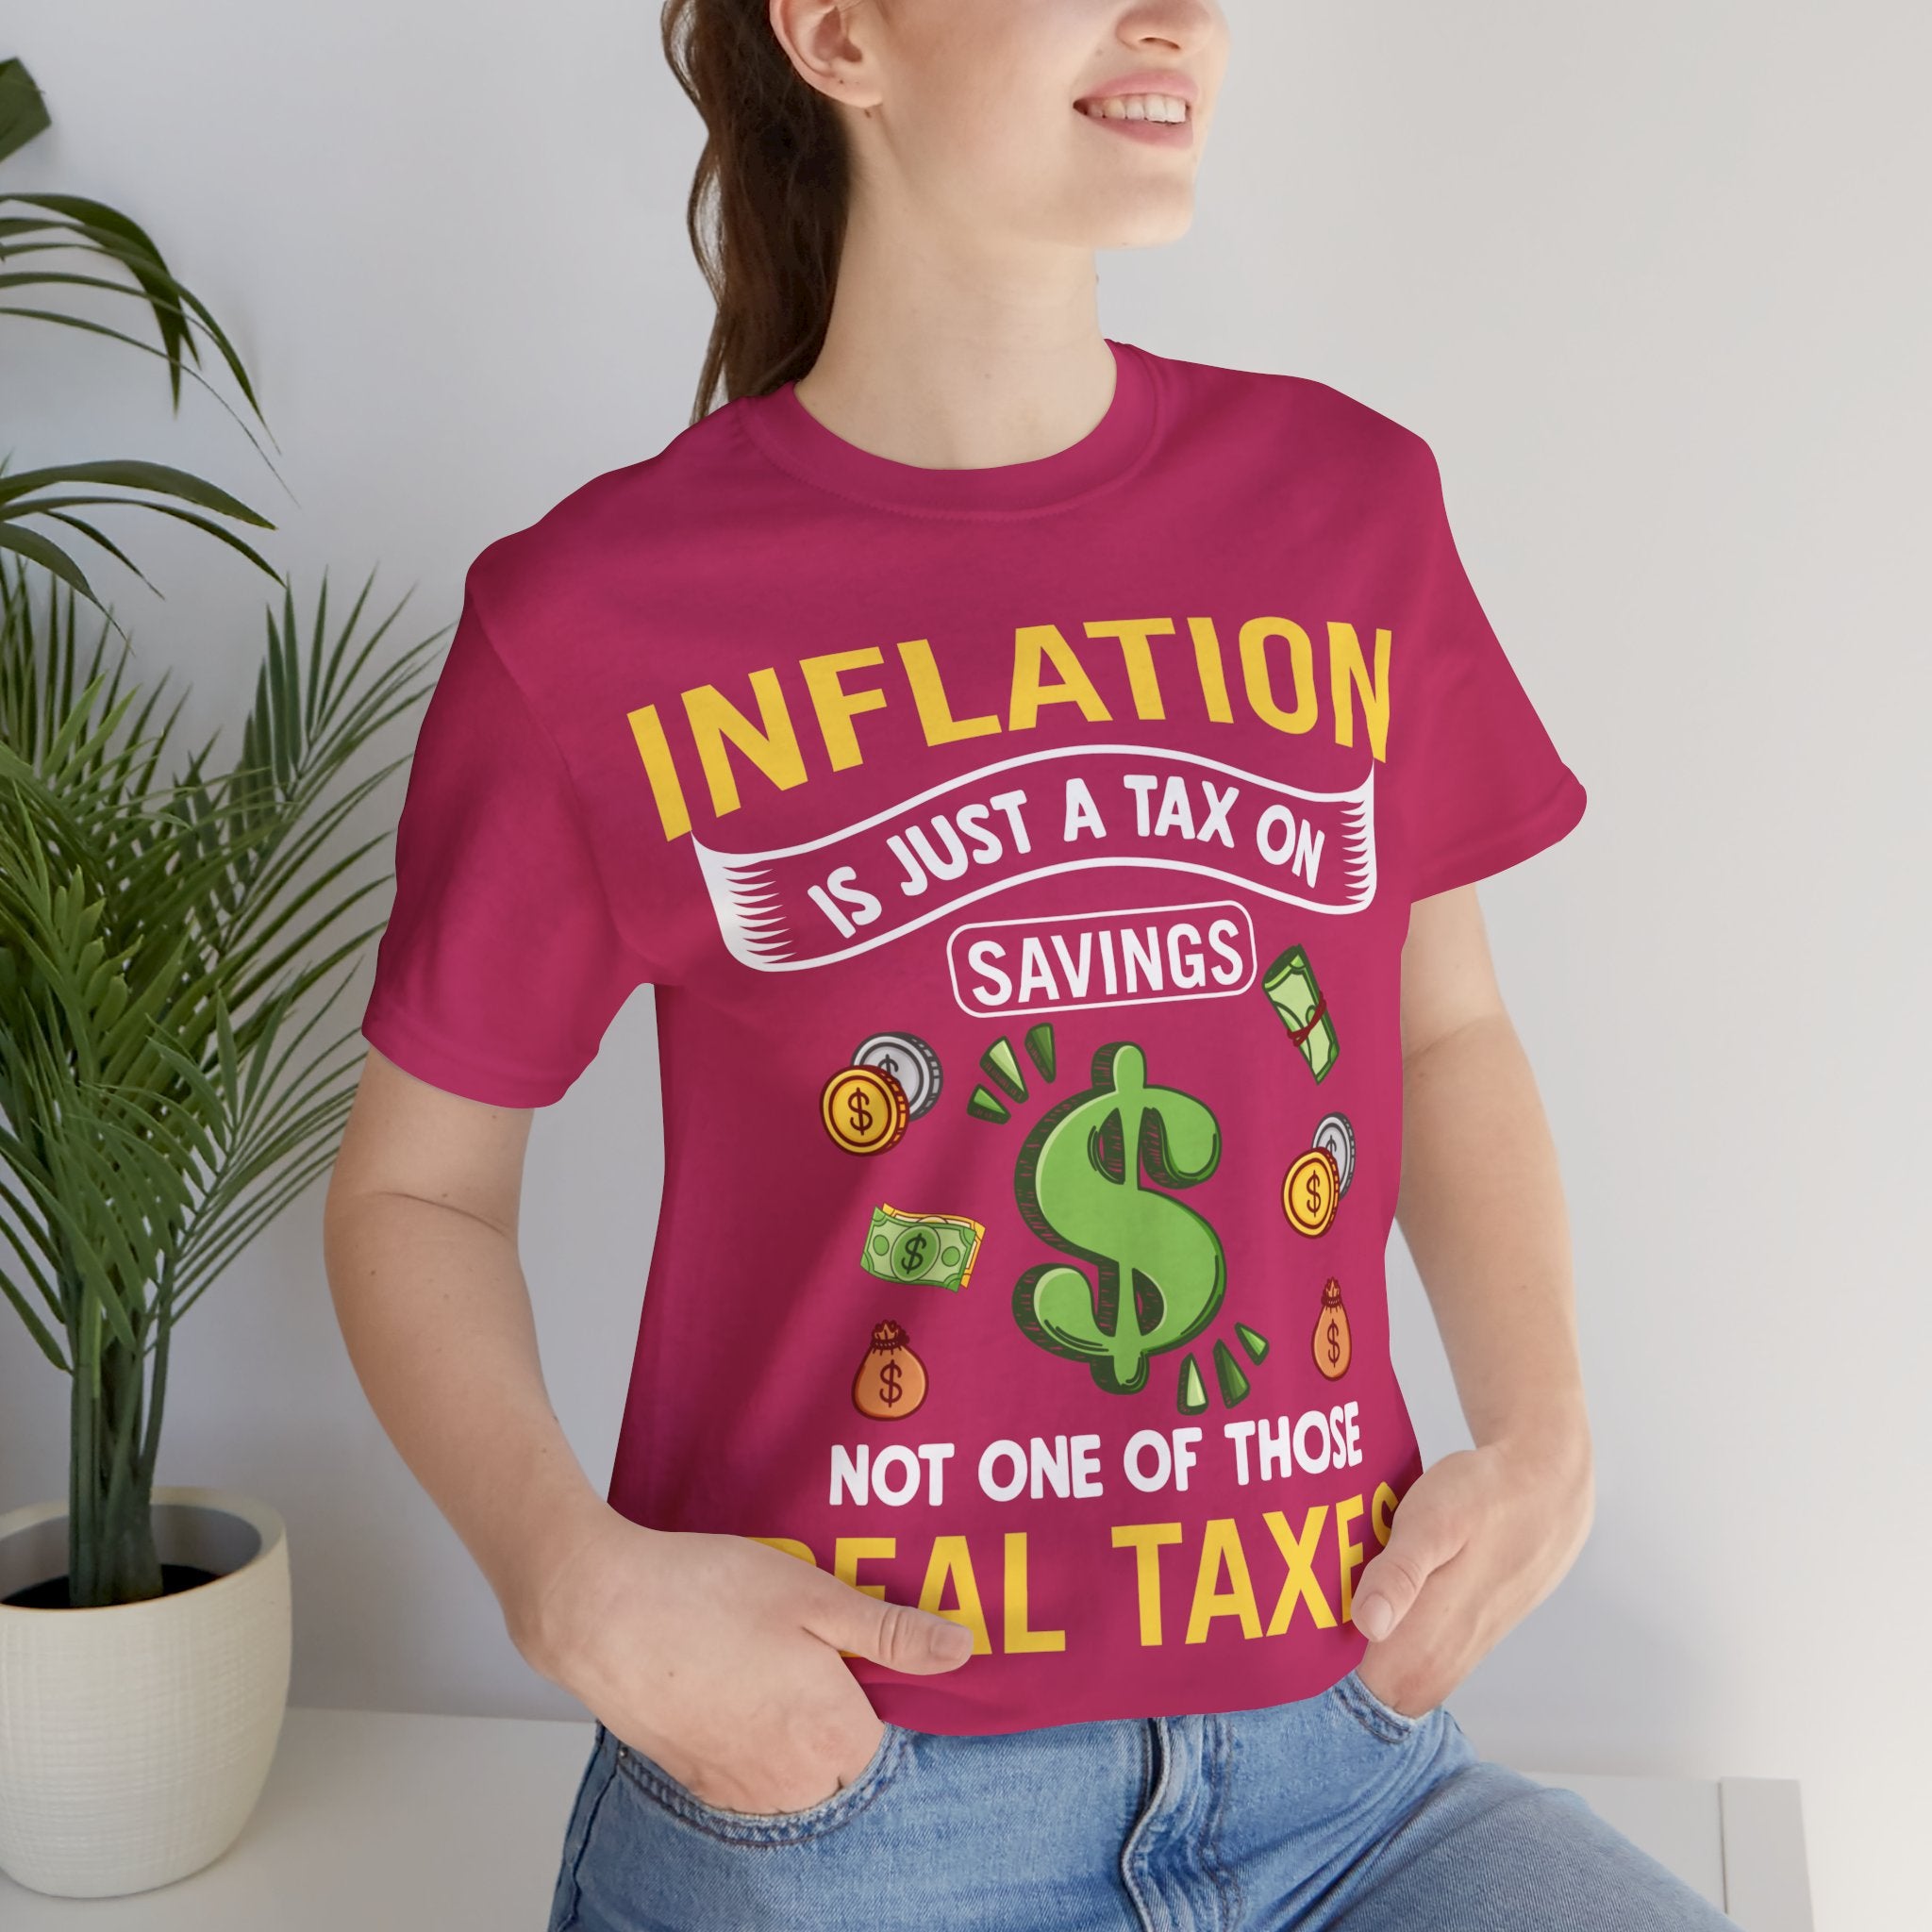 Inflation: Not a Real Tax - Dollar Sign